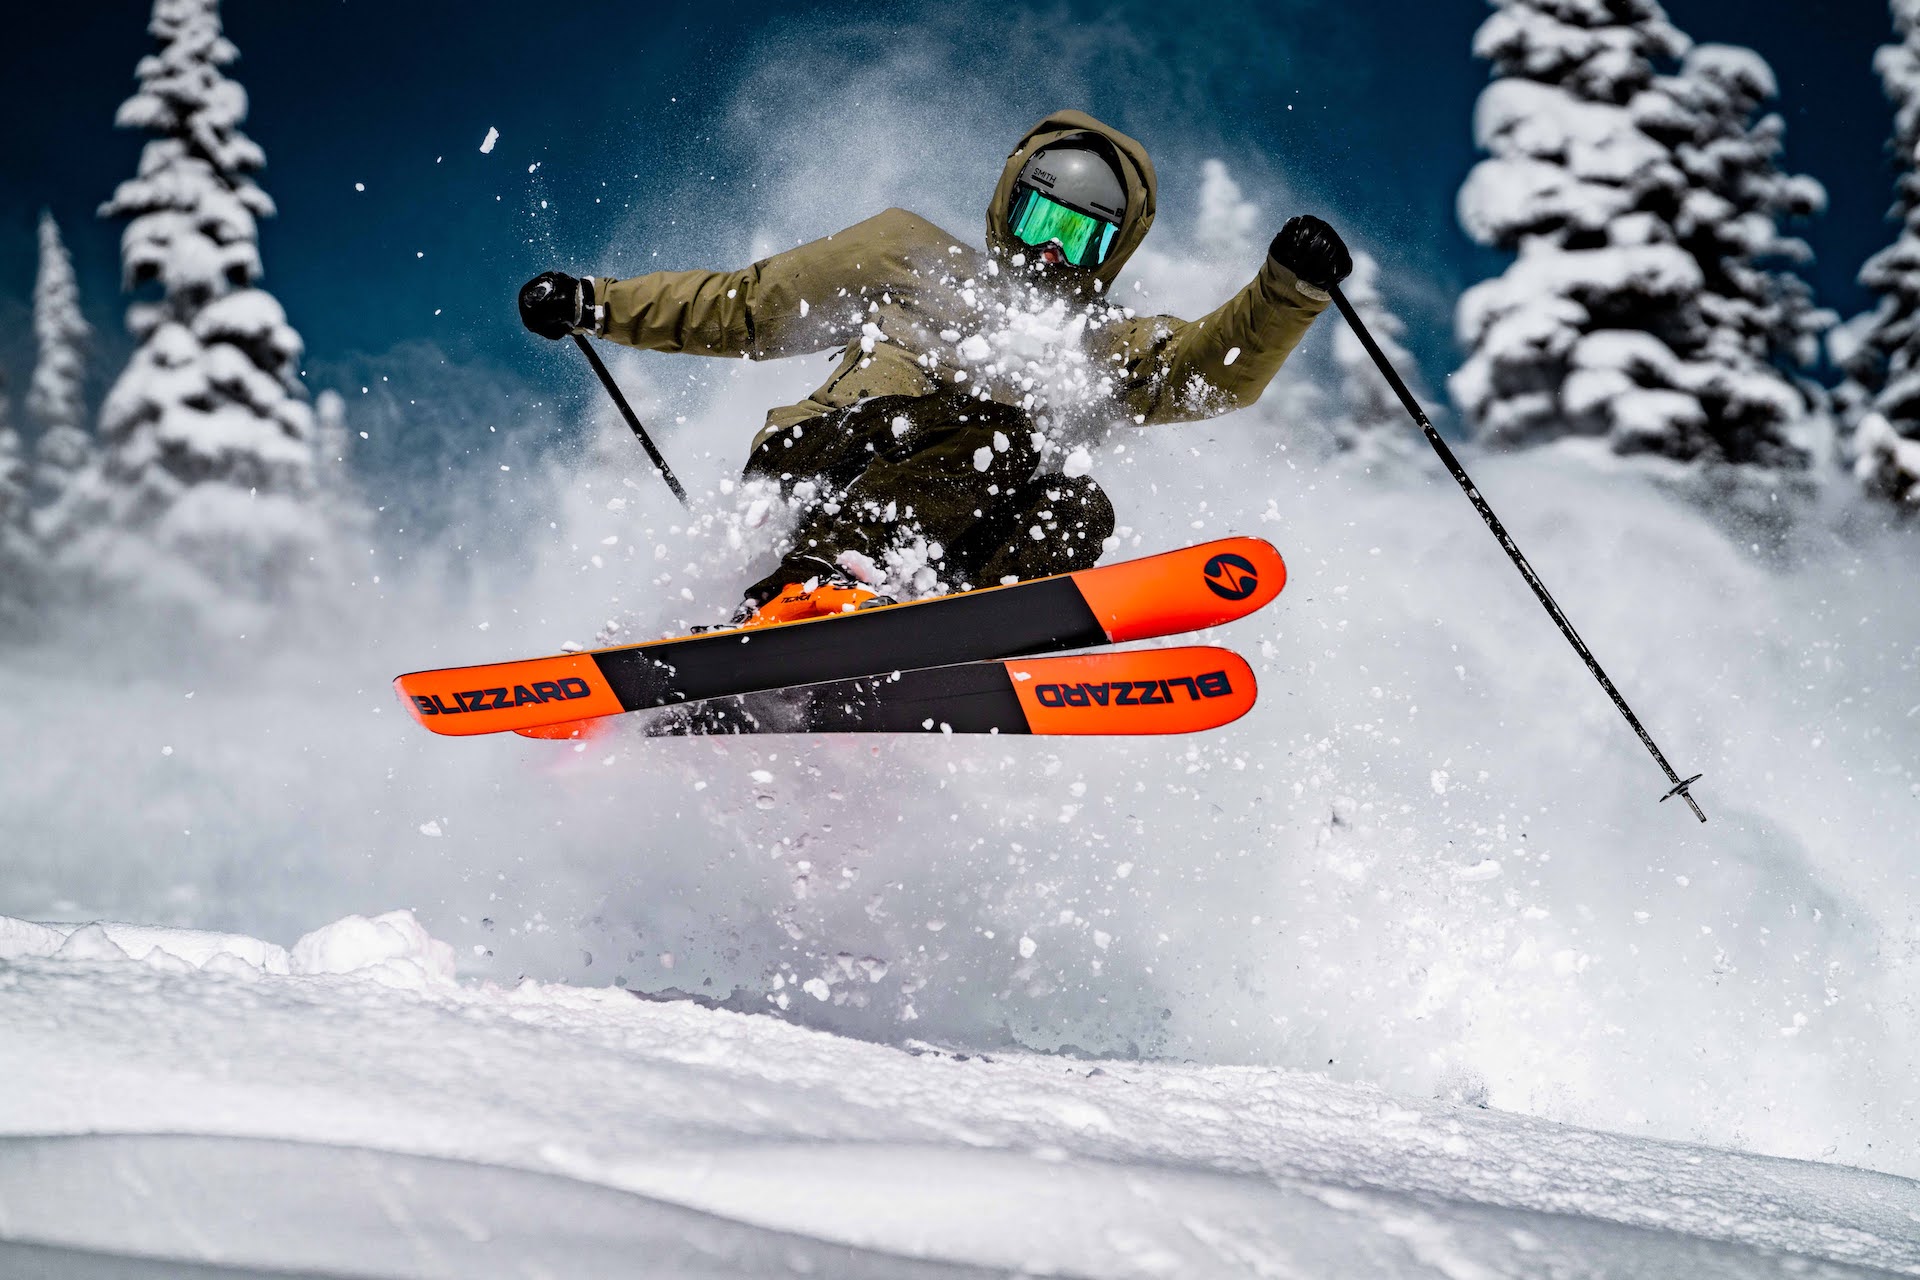 Free Ski Kit: Enter to Win Fresh Gear From Blizzard, Tecnica, and Picture